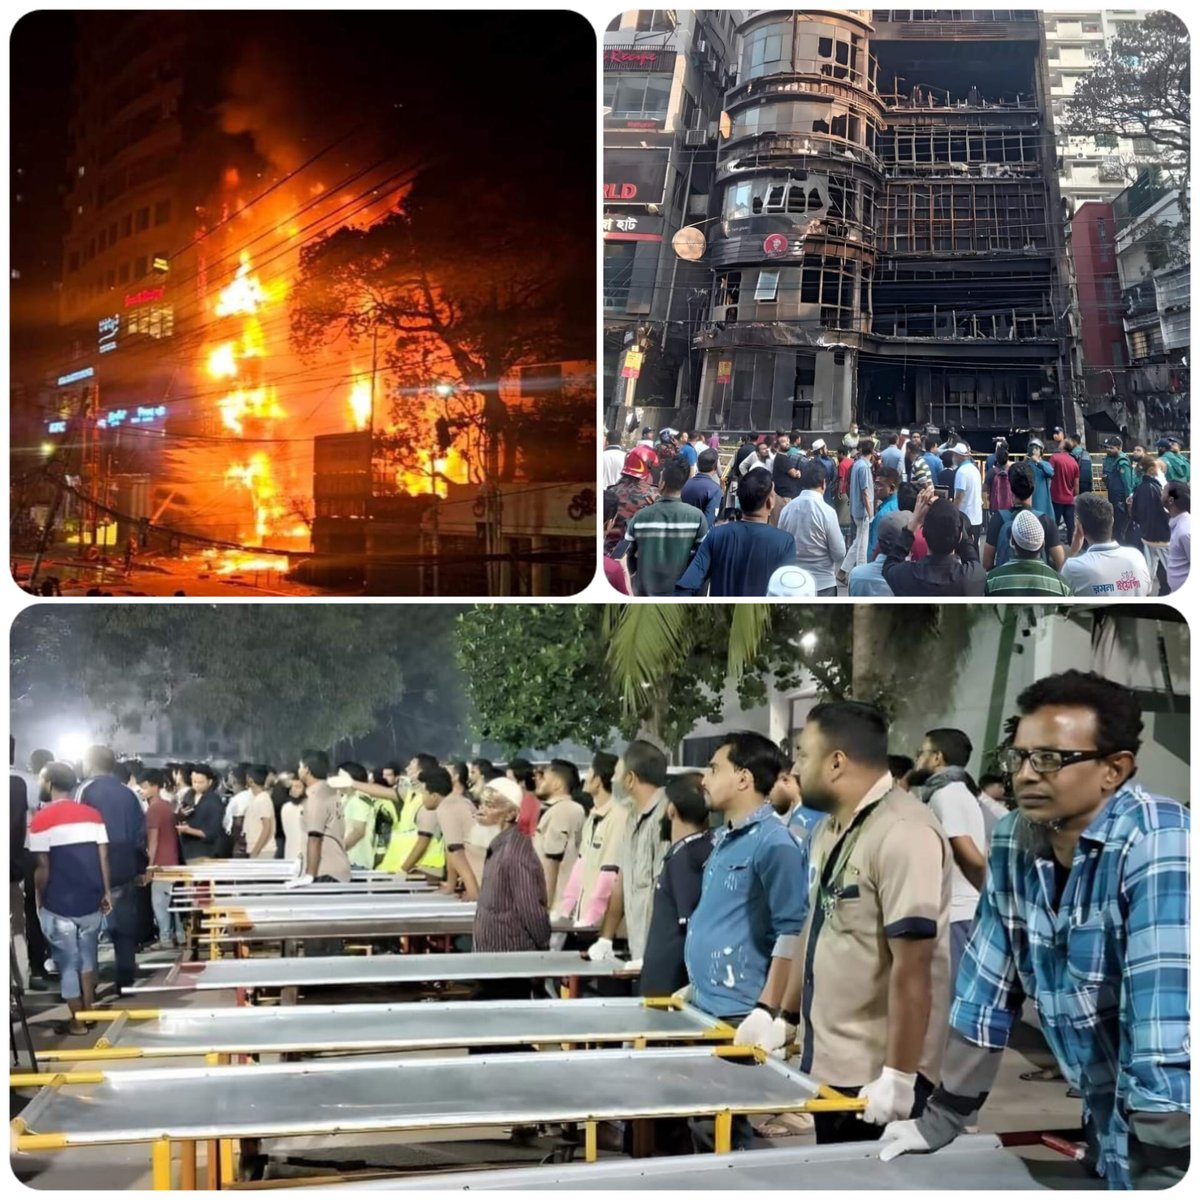 The #Dhaka fire's loss of 45 lives is tragic. Condolences to affected families. Urgent action needed in Bangladesh to address fires from safety lapses and corruption. Thorough investigations are crucial to prevent further loss.
#BaileyRoad